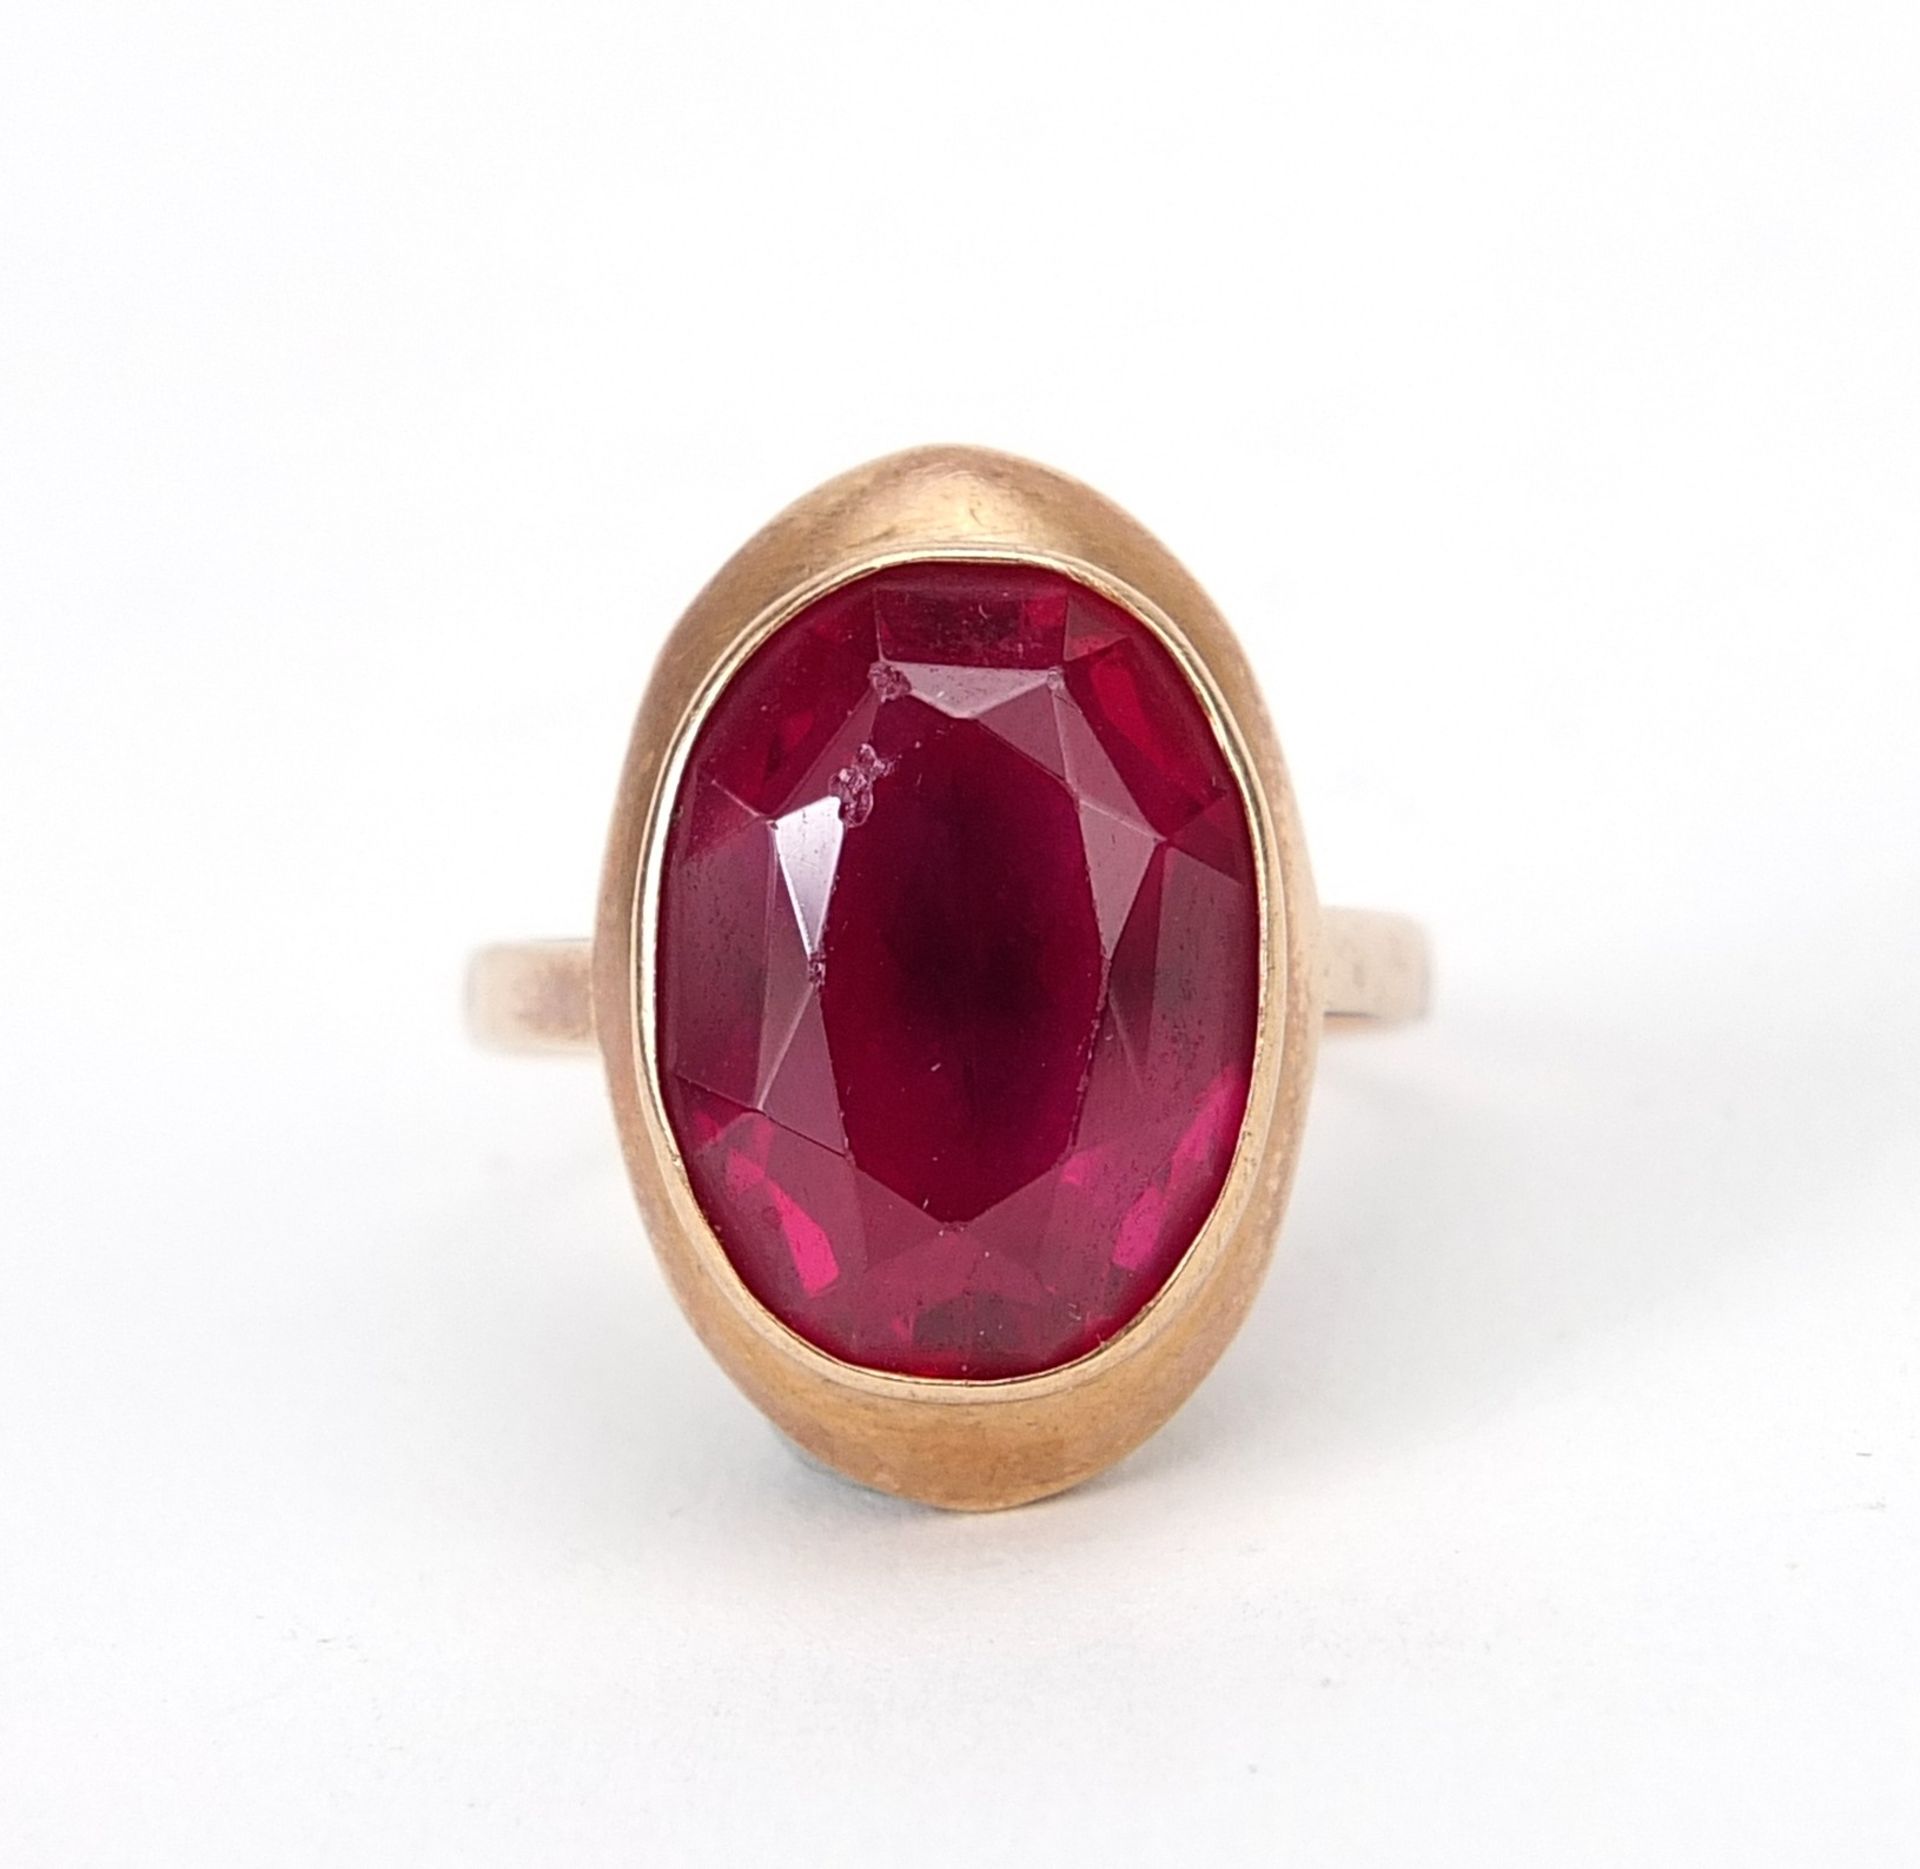 Russian 15ct gold pink stone ring, (tests as ruby) size Q, 5.6g